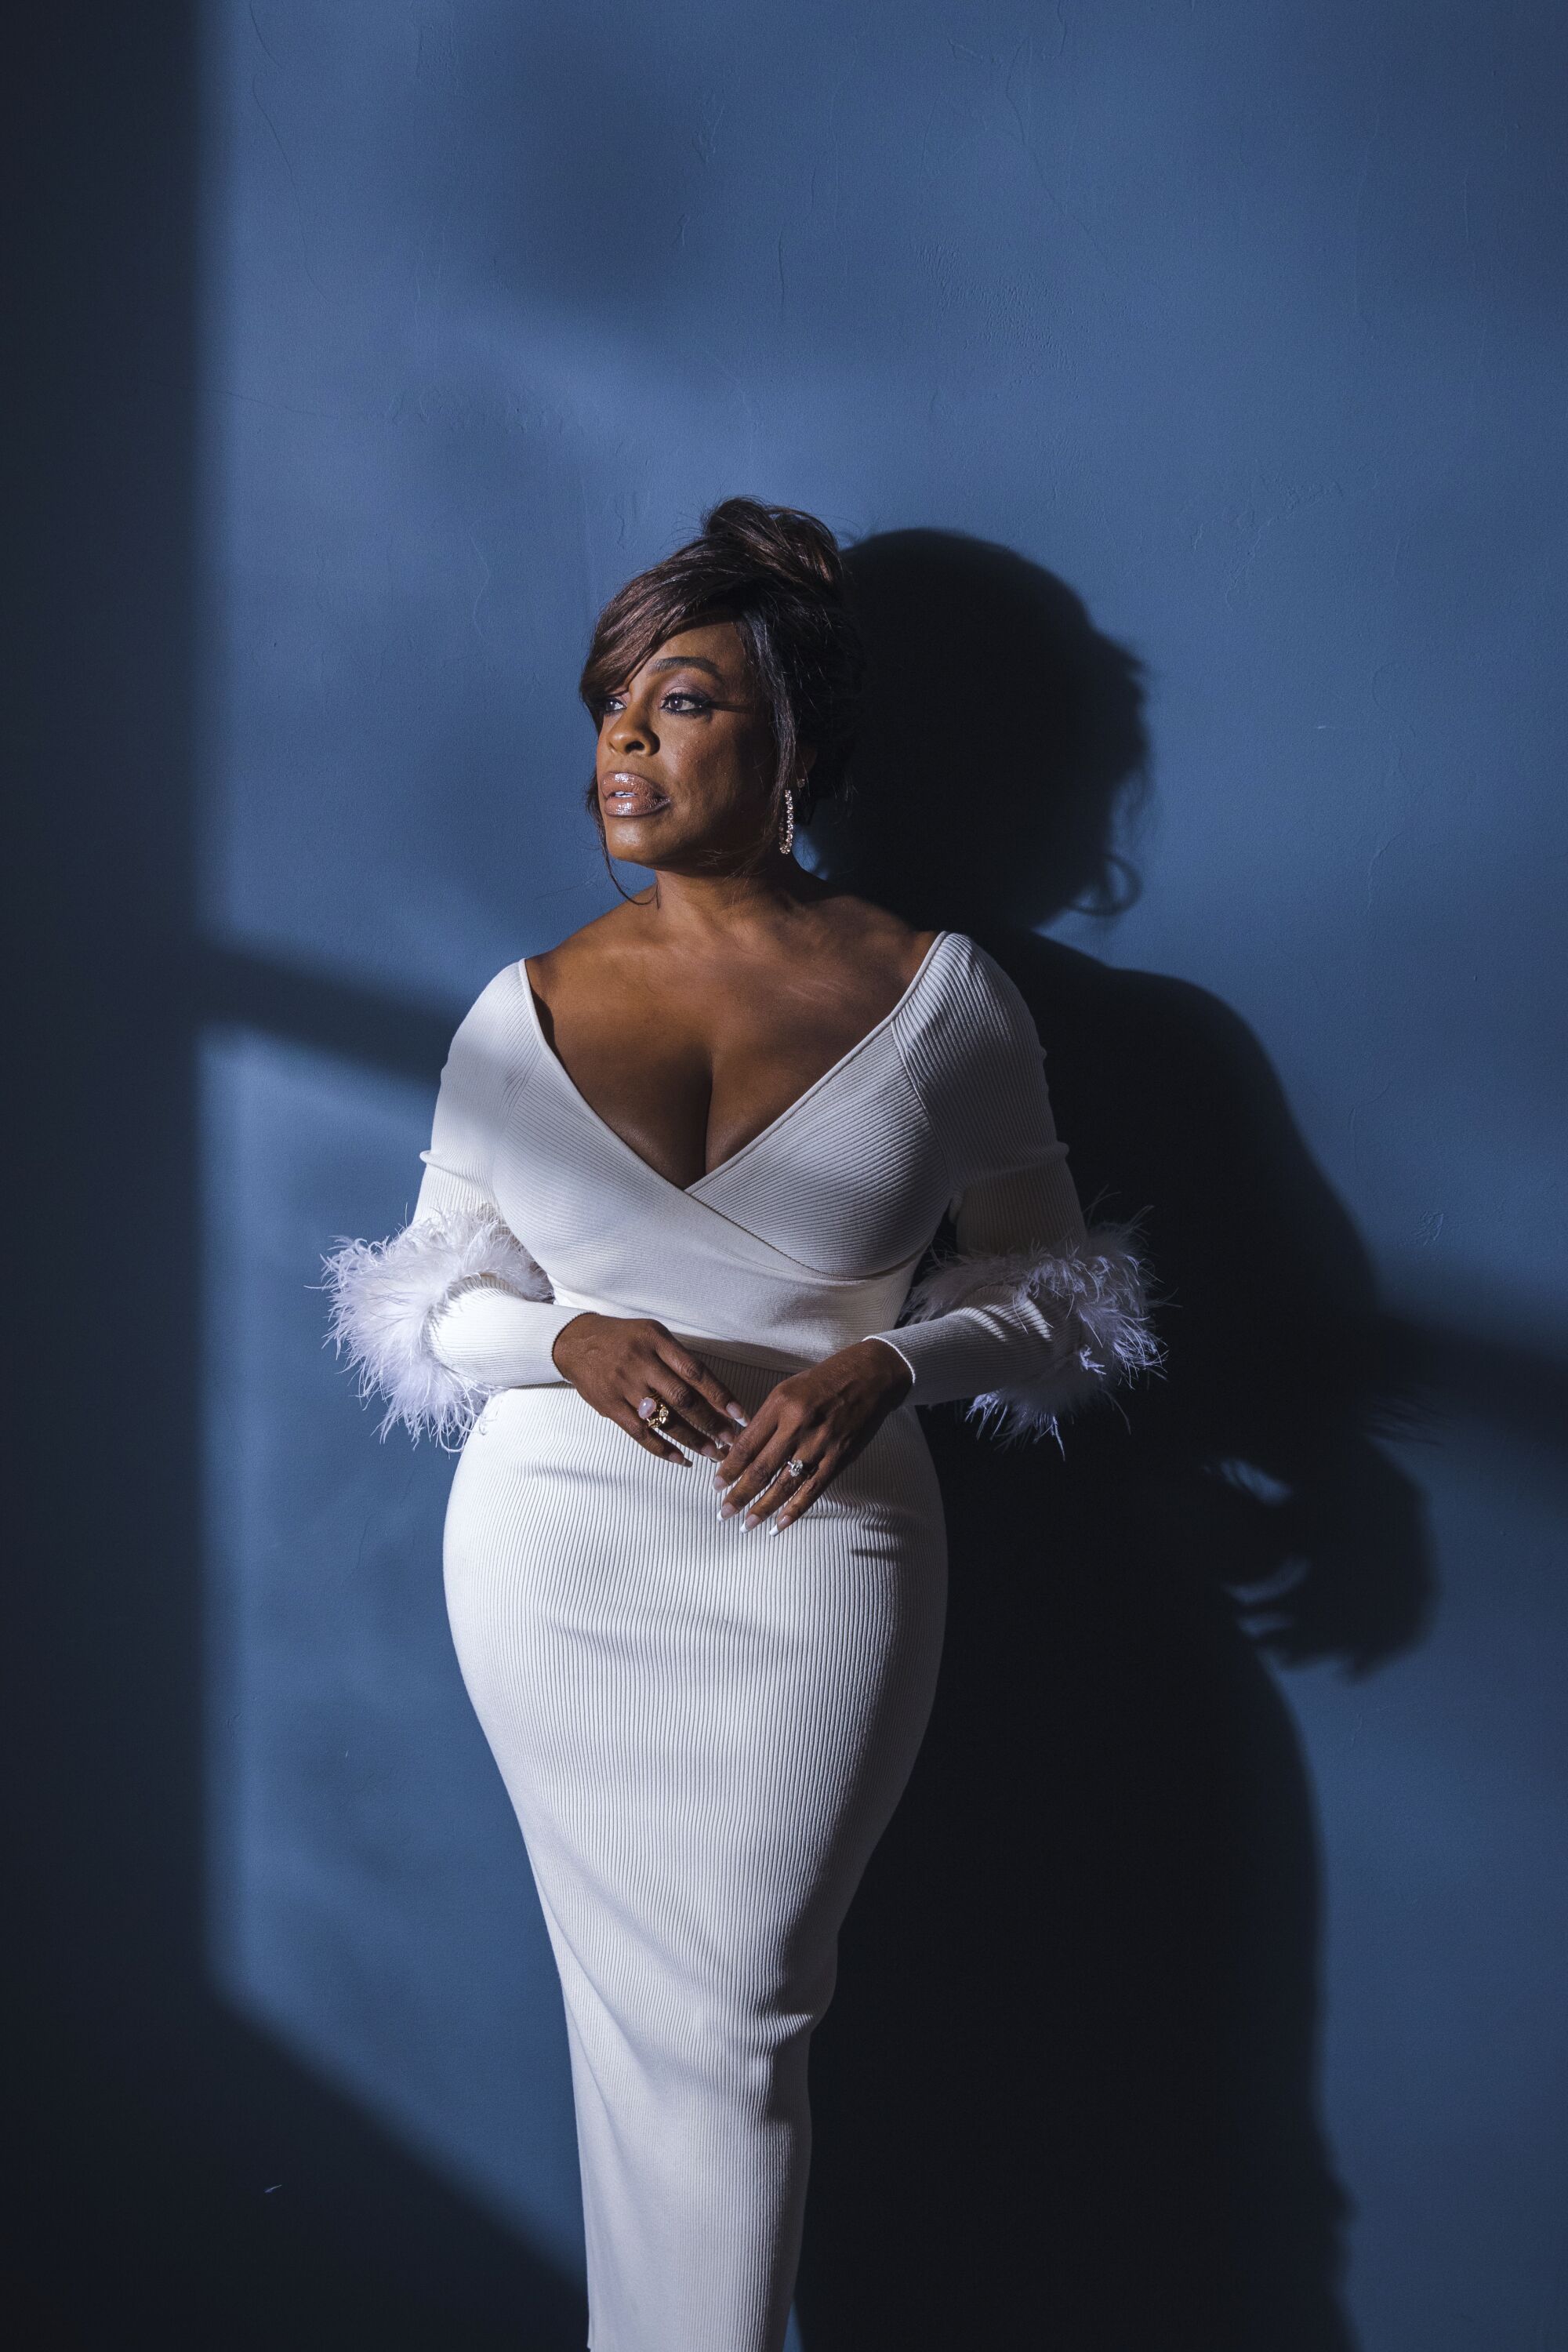 Niecy Nash-Betts poses for a portrait on the set of her show The Rookie: Fed.